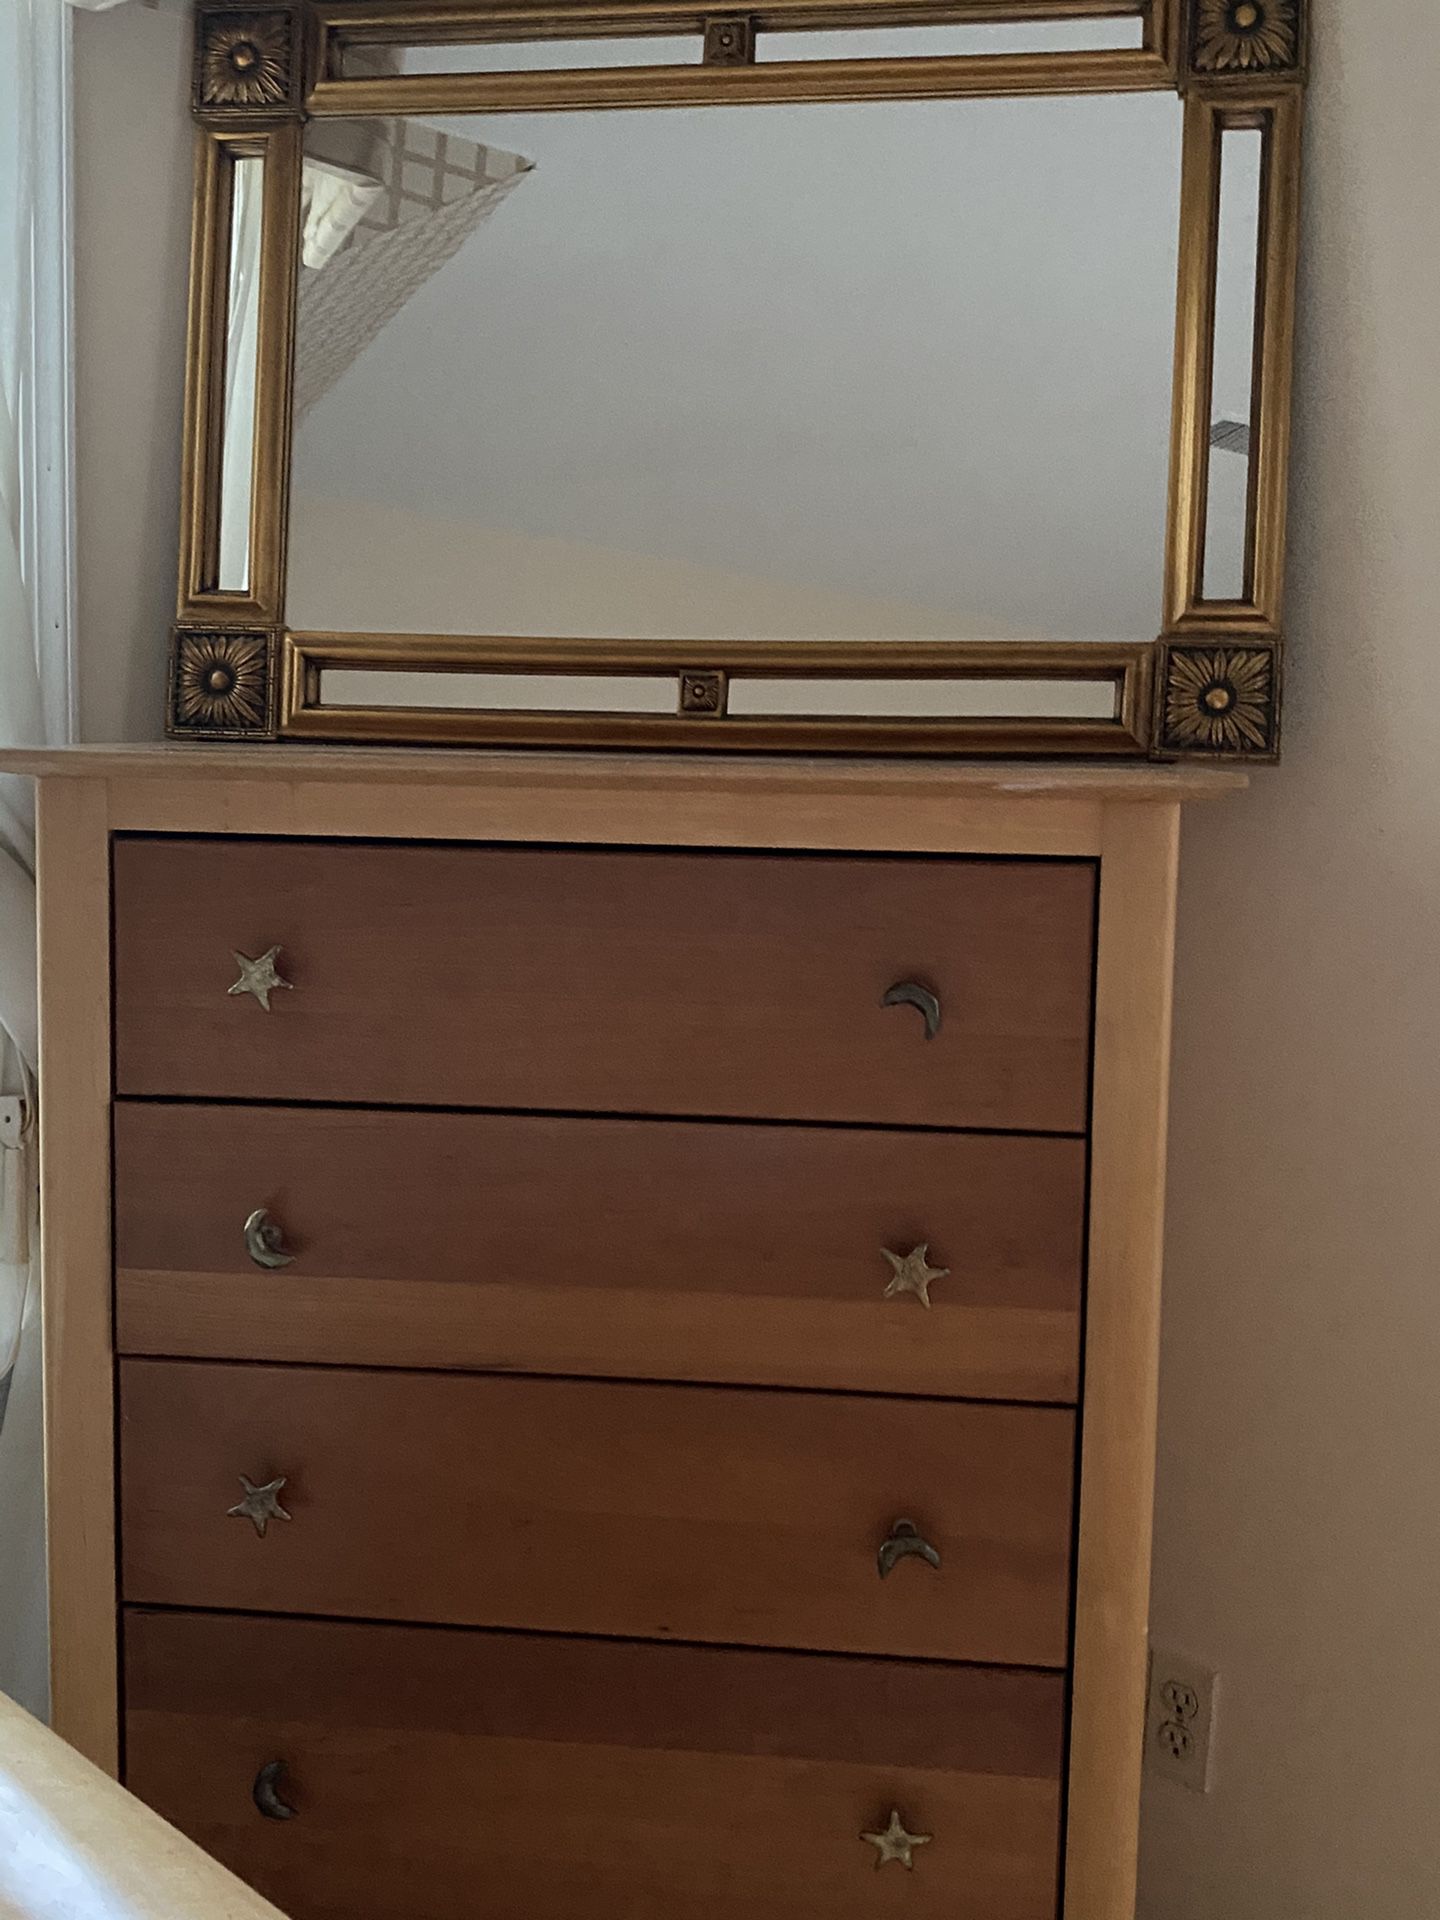 Mirror and Drawers